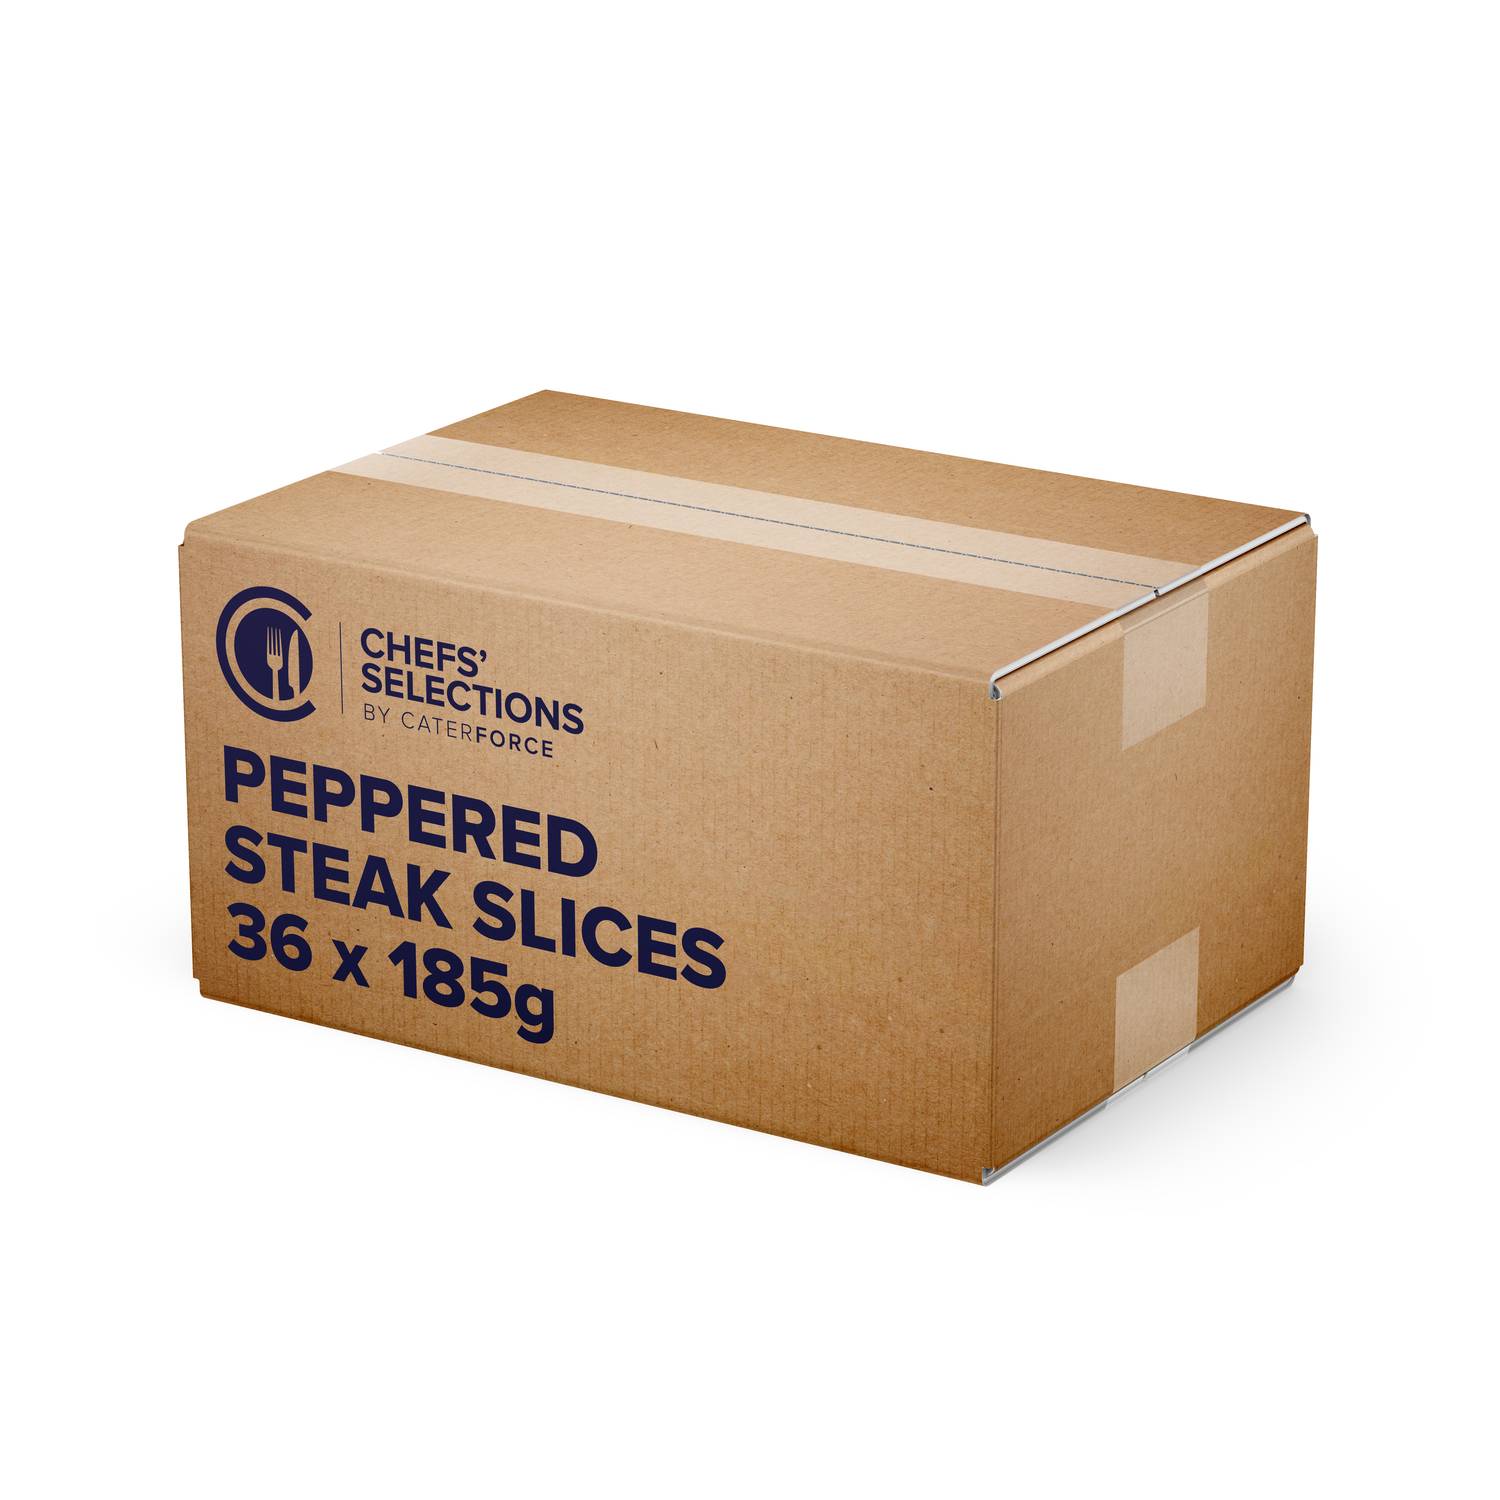 Chefs’ Selections Peppered Steak Slice (36 x 185g)